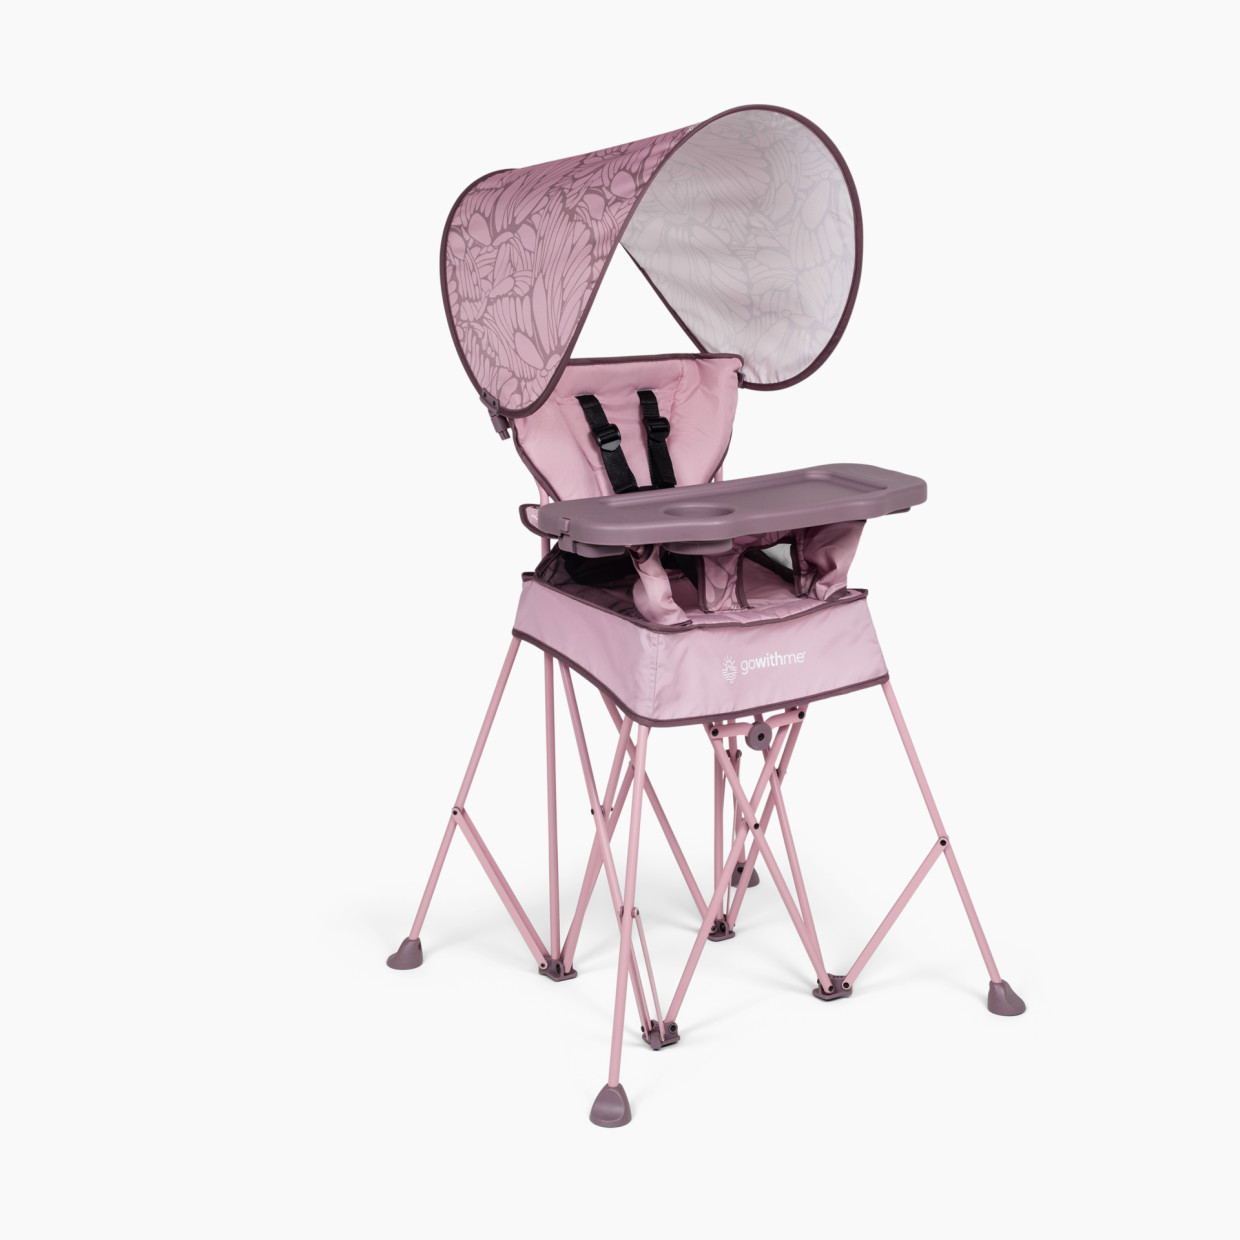 Baby Delight Go With Me Uplift Deluxe Portable High Chair With Canopy - Canyon Rose.